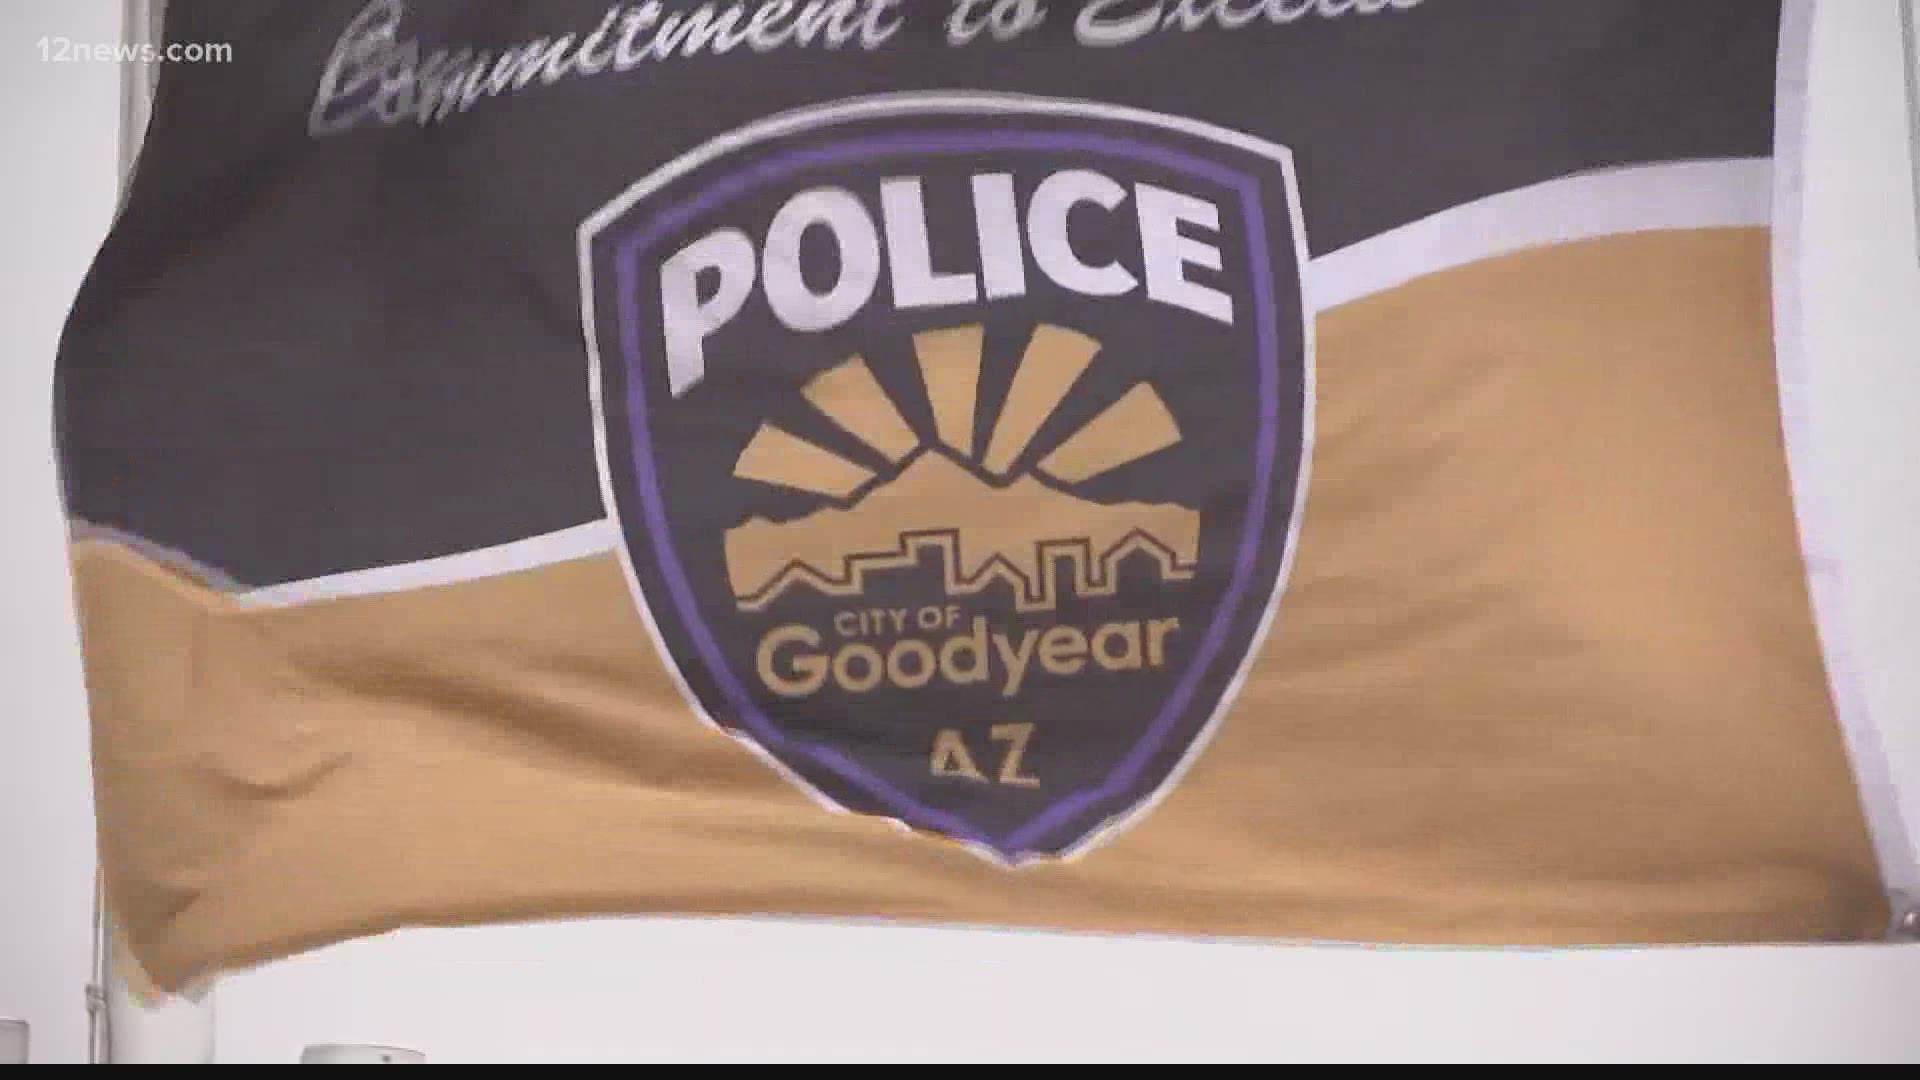 The Goodyear Police Department SWAT team is not currently operational while department leadership conducts a “comprehensive review.”